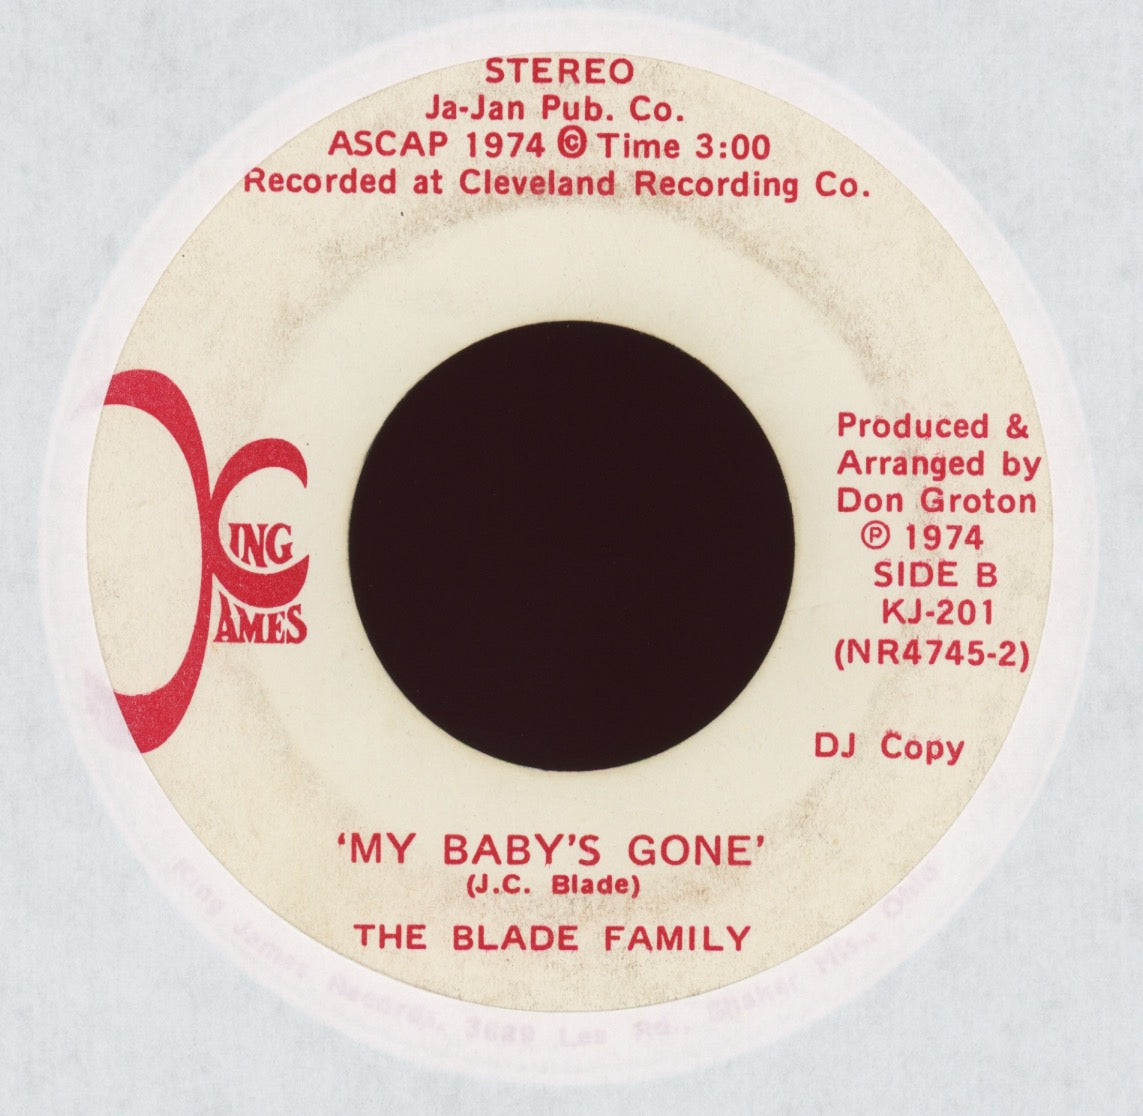 The Blade Family - My Baby's Gone on King James Promo